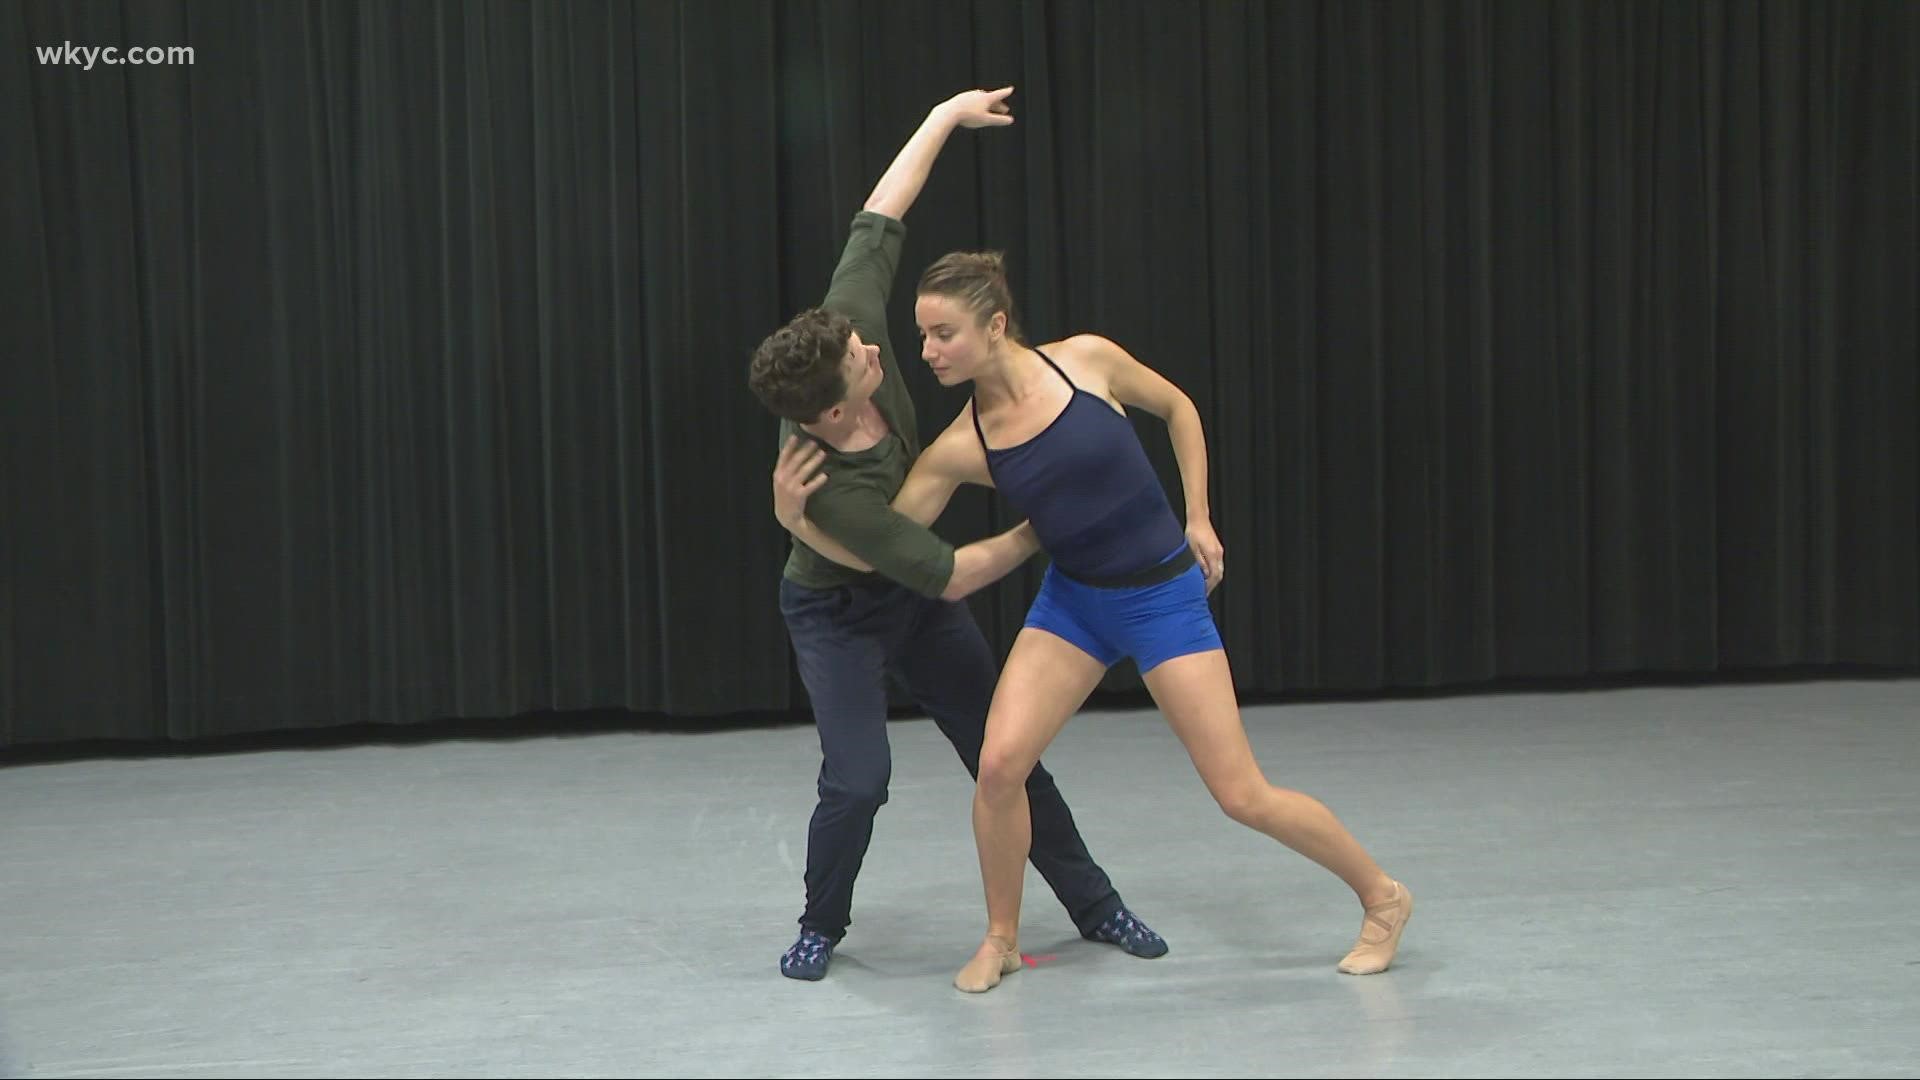 Students at the University of Akron have been learning how dance and mental health meet.